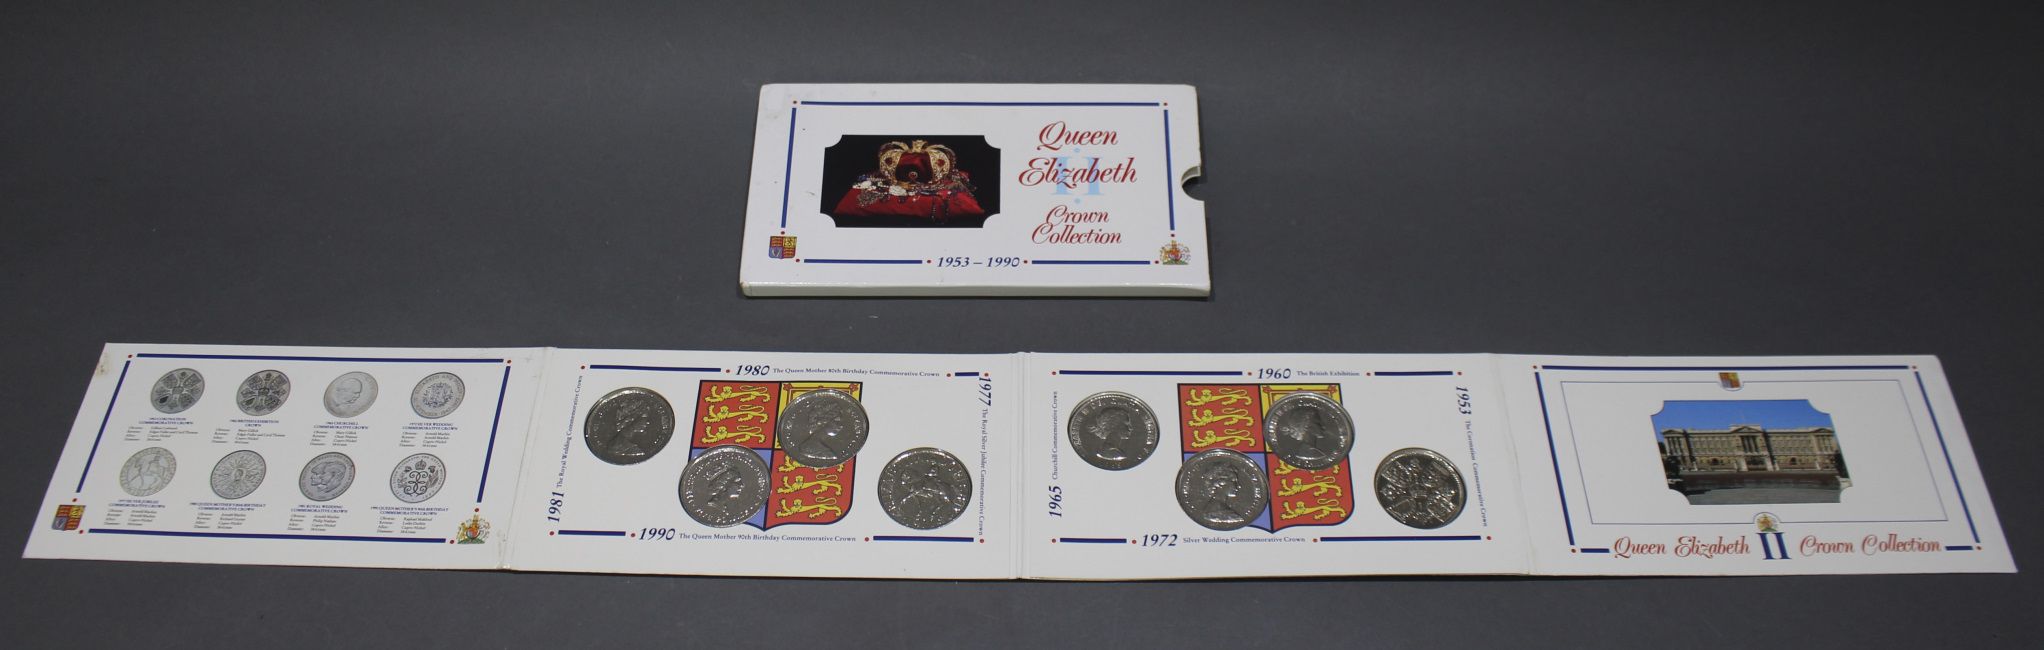 Queen Elizabeth 1953-1990 Crown Coin Collection - Image 4 of 8